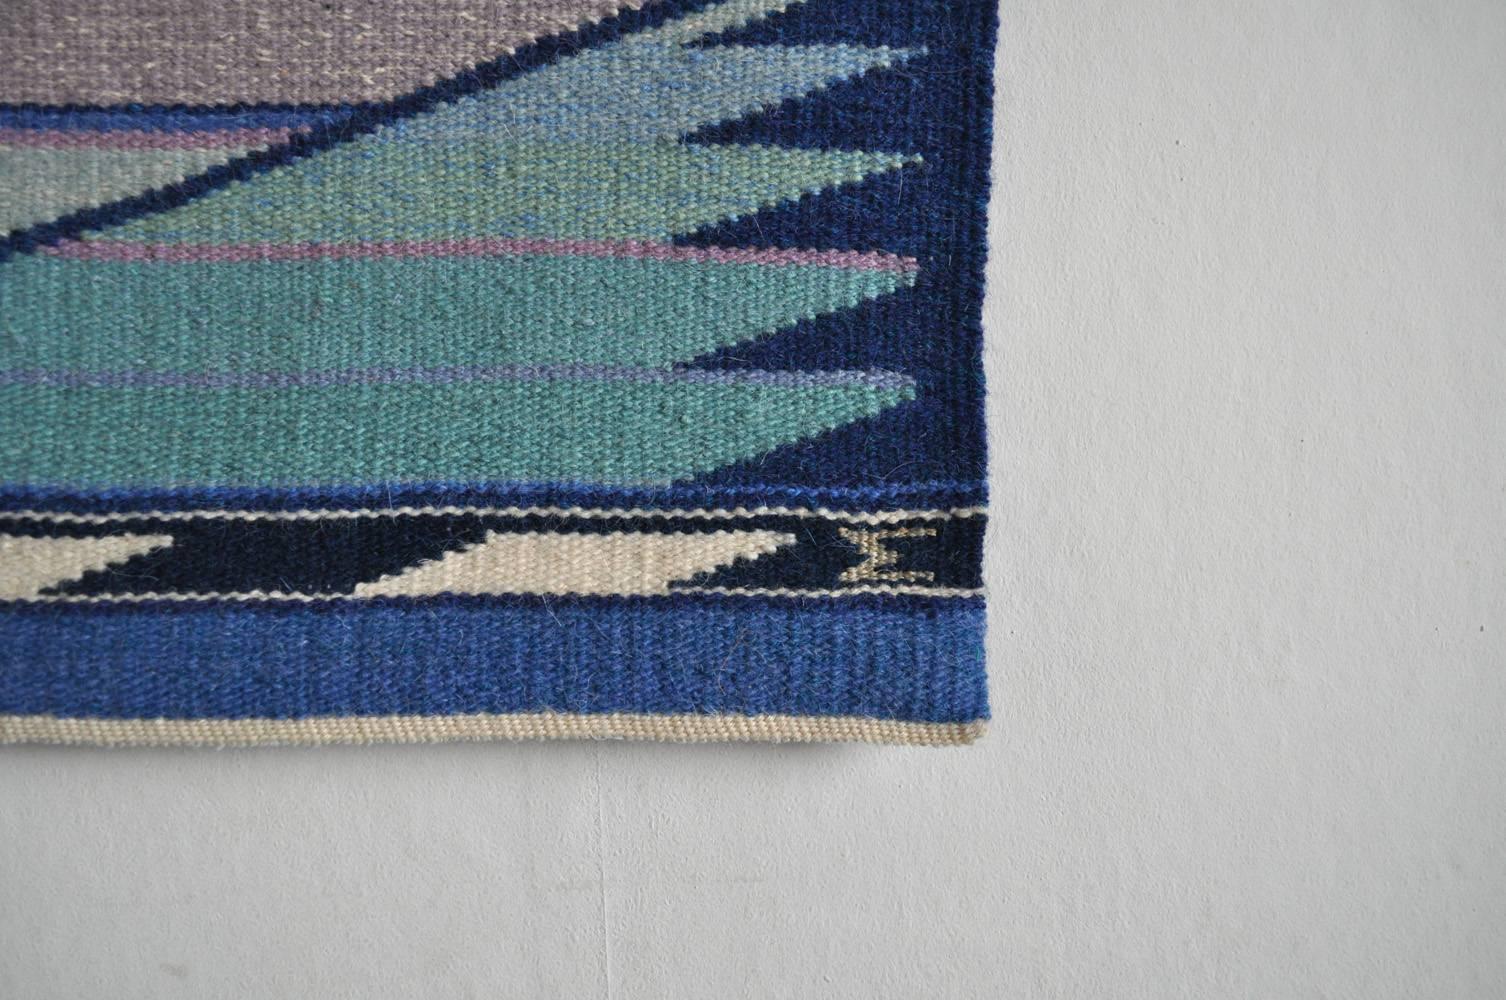 Hand-Woven High Quality Handwoven Danish Tapestry from the 1980s For Sale